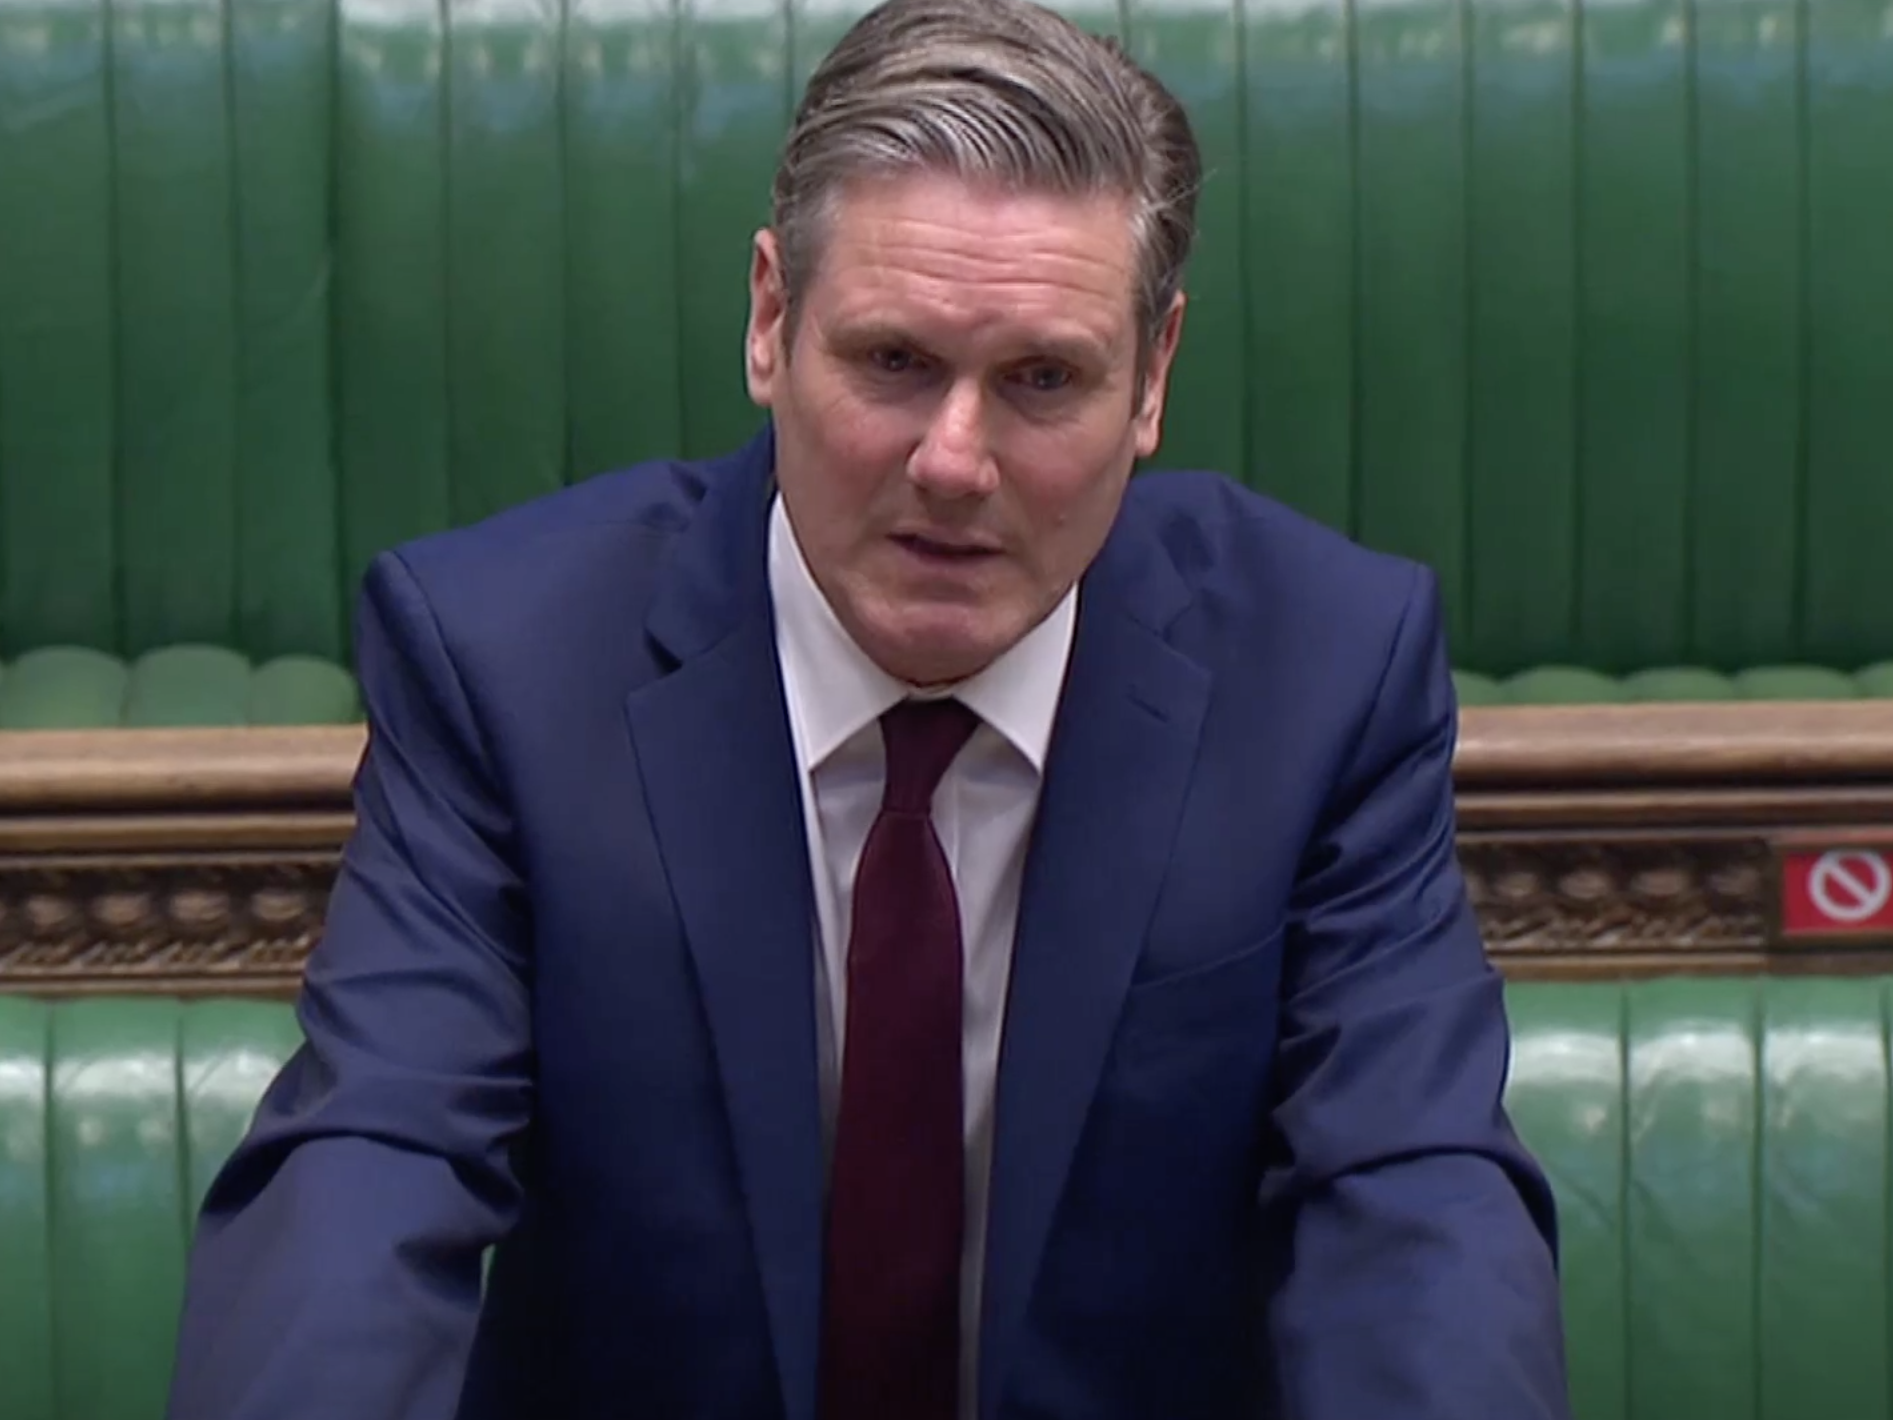 Keir Starmer's first PMQs as Labour leader, 22 April 2020